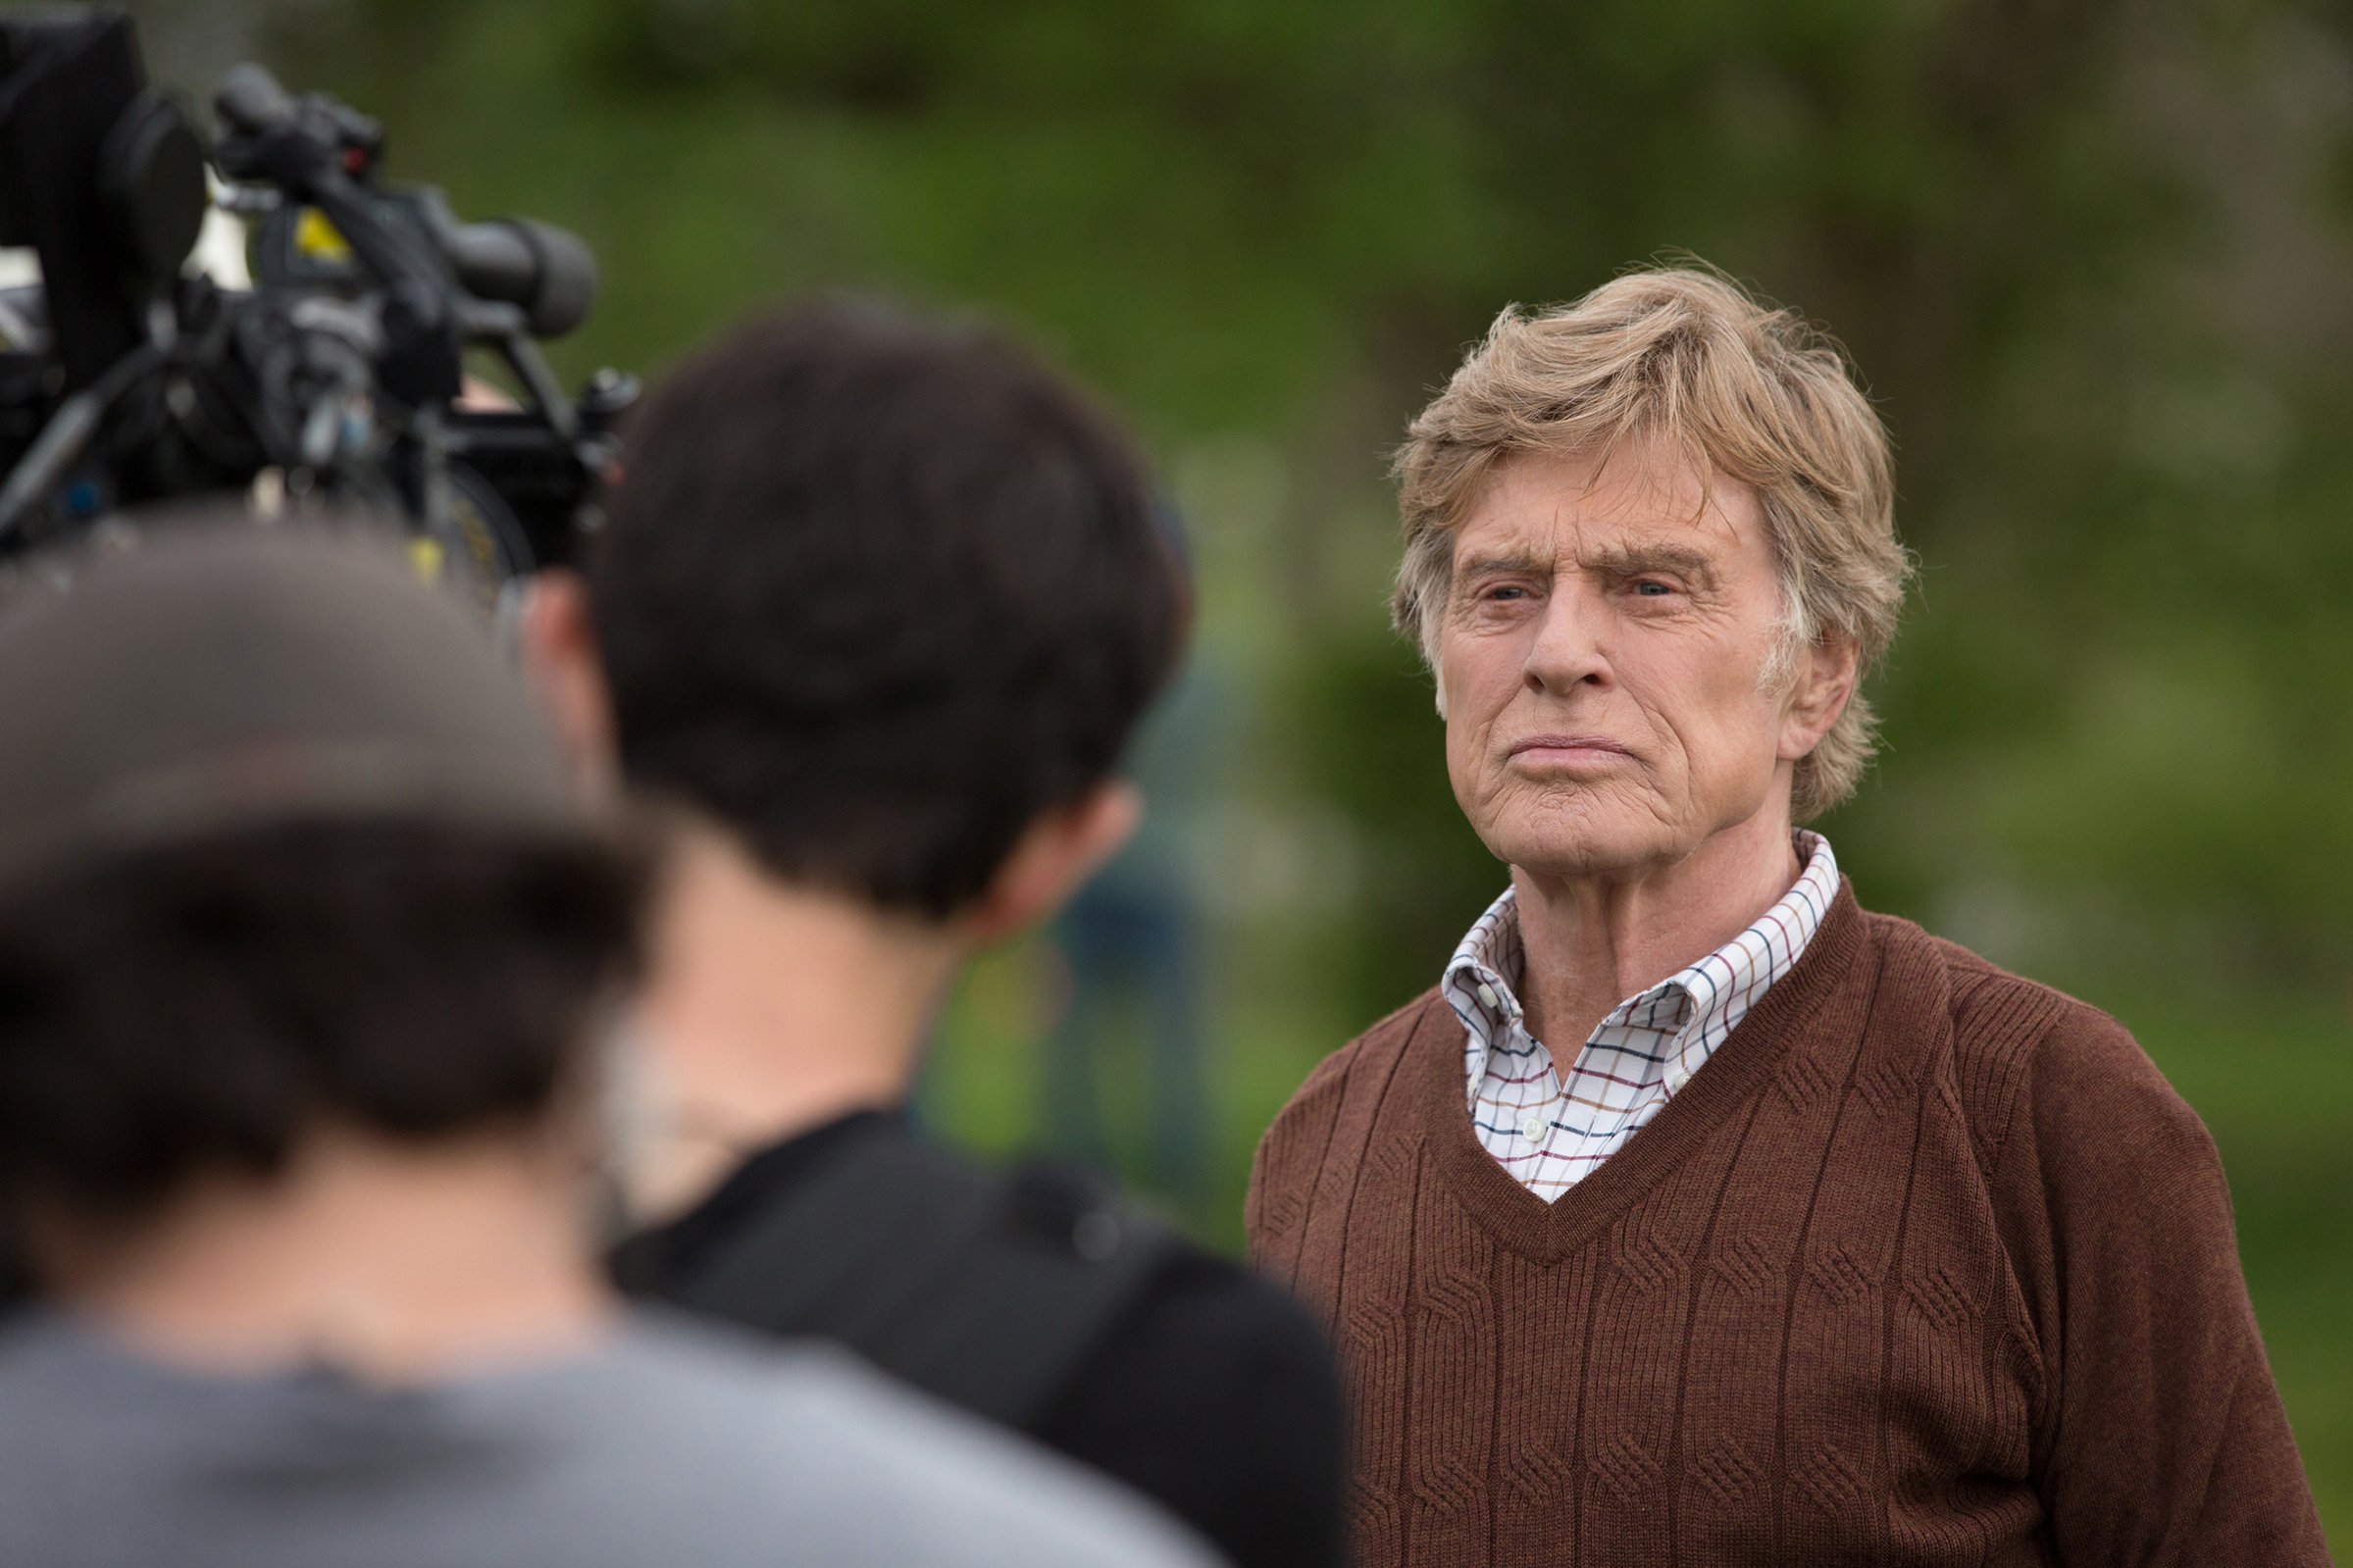 Robert Redford on the set of "The Old Man & the Gun" where he plays real-life bank robber Forrest Tucker.